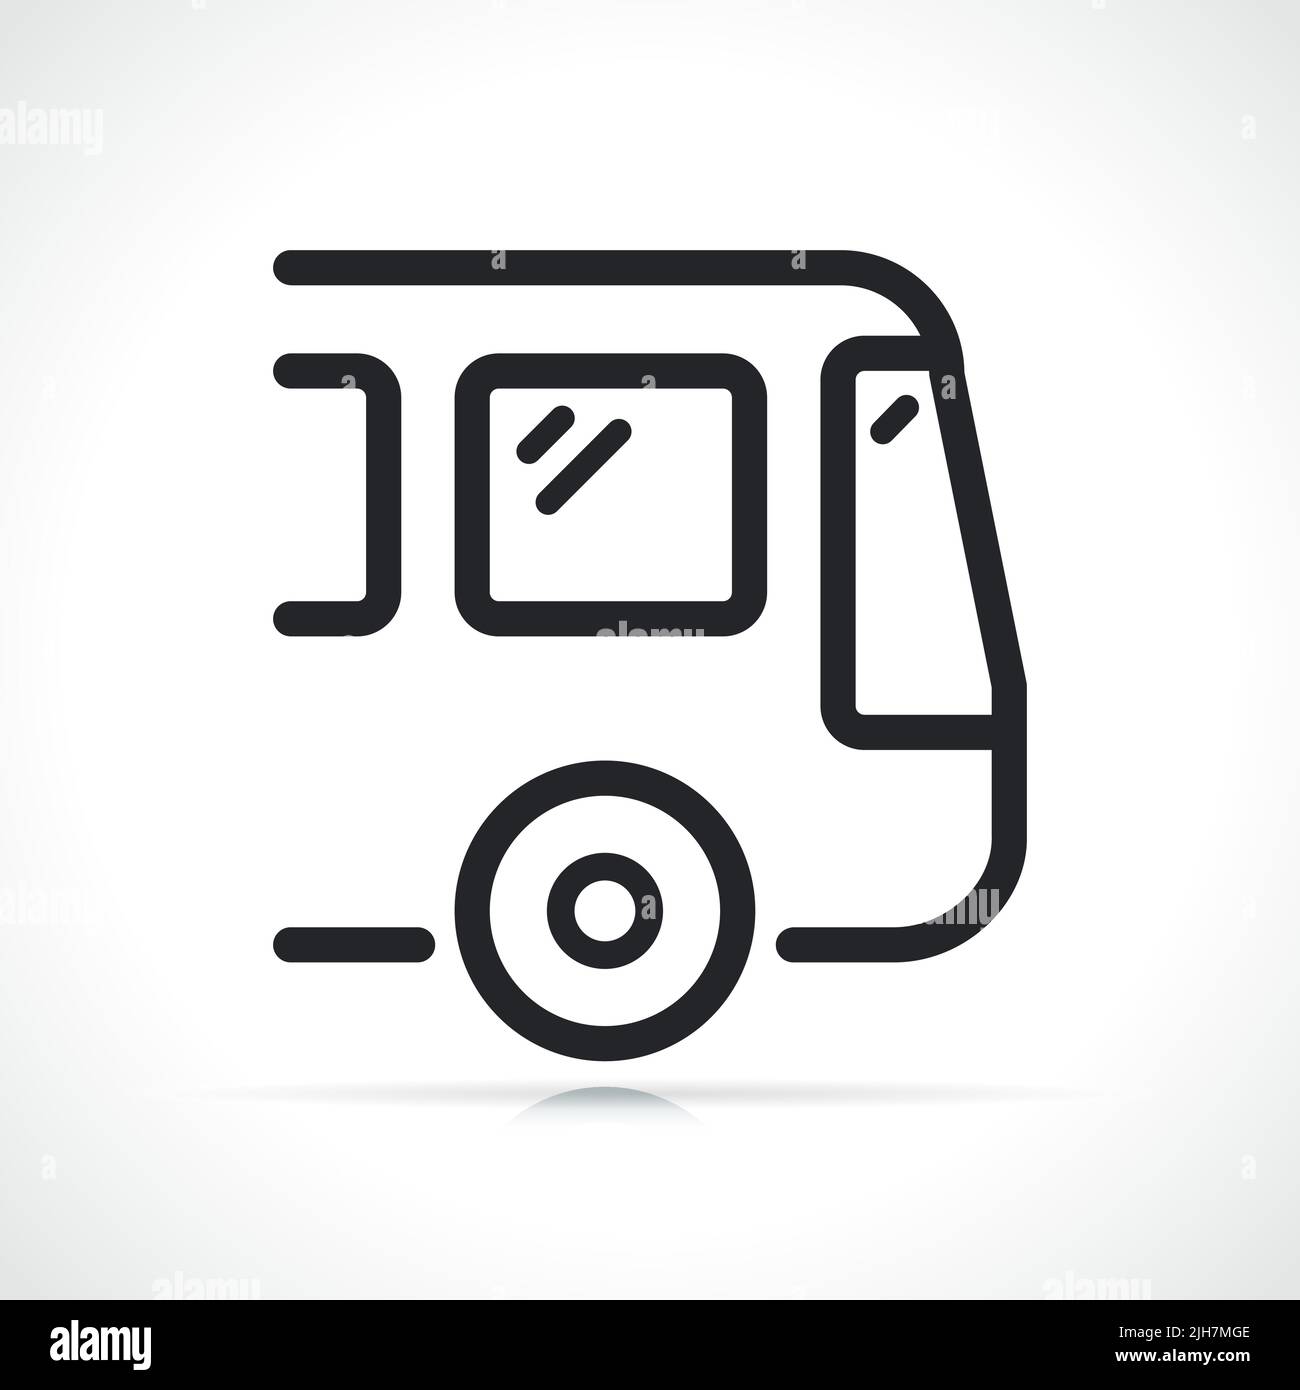 bus or public transport thin line icon Stock Vector